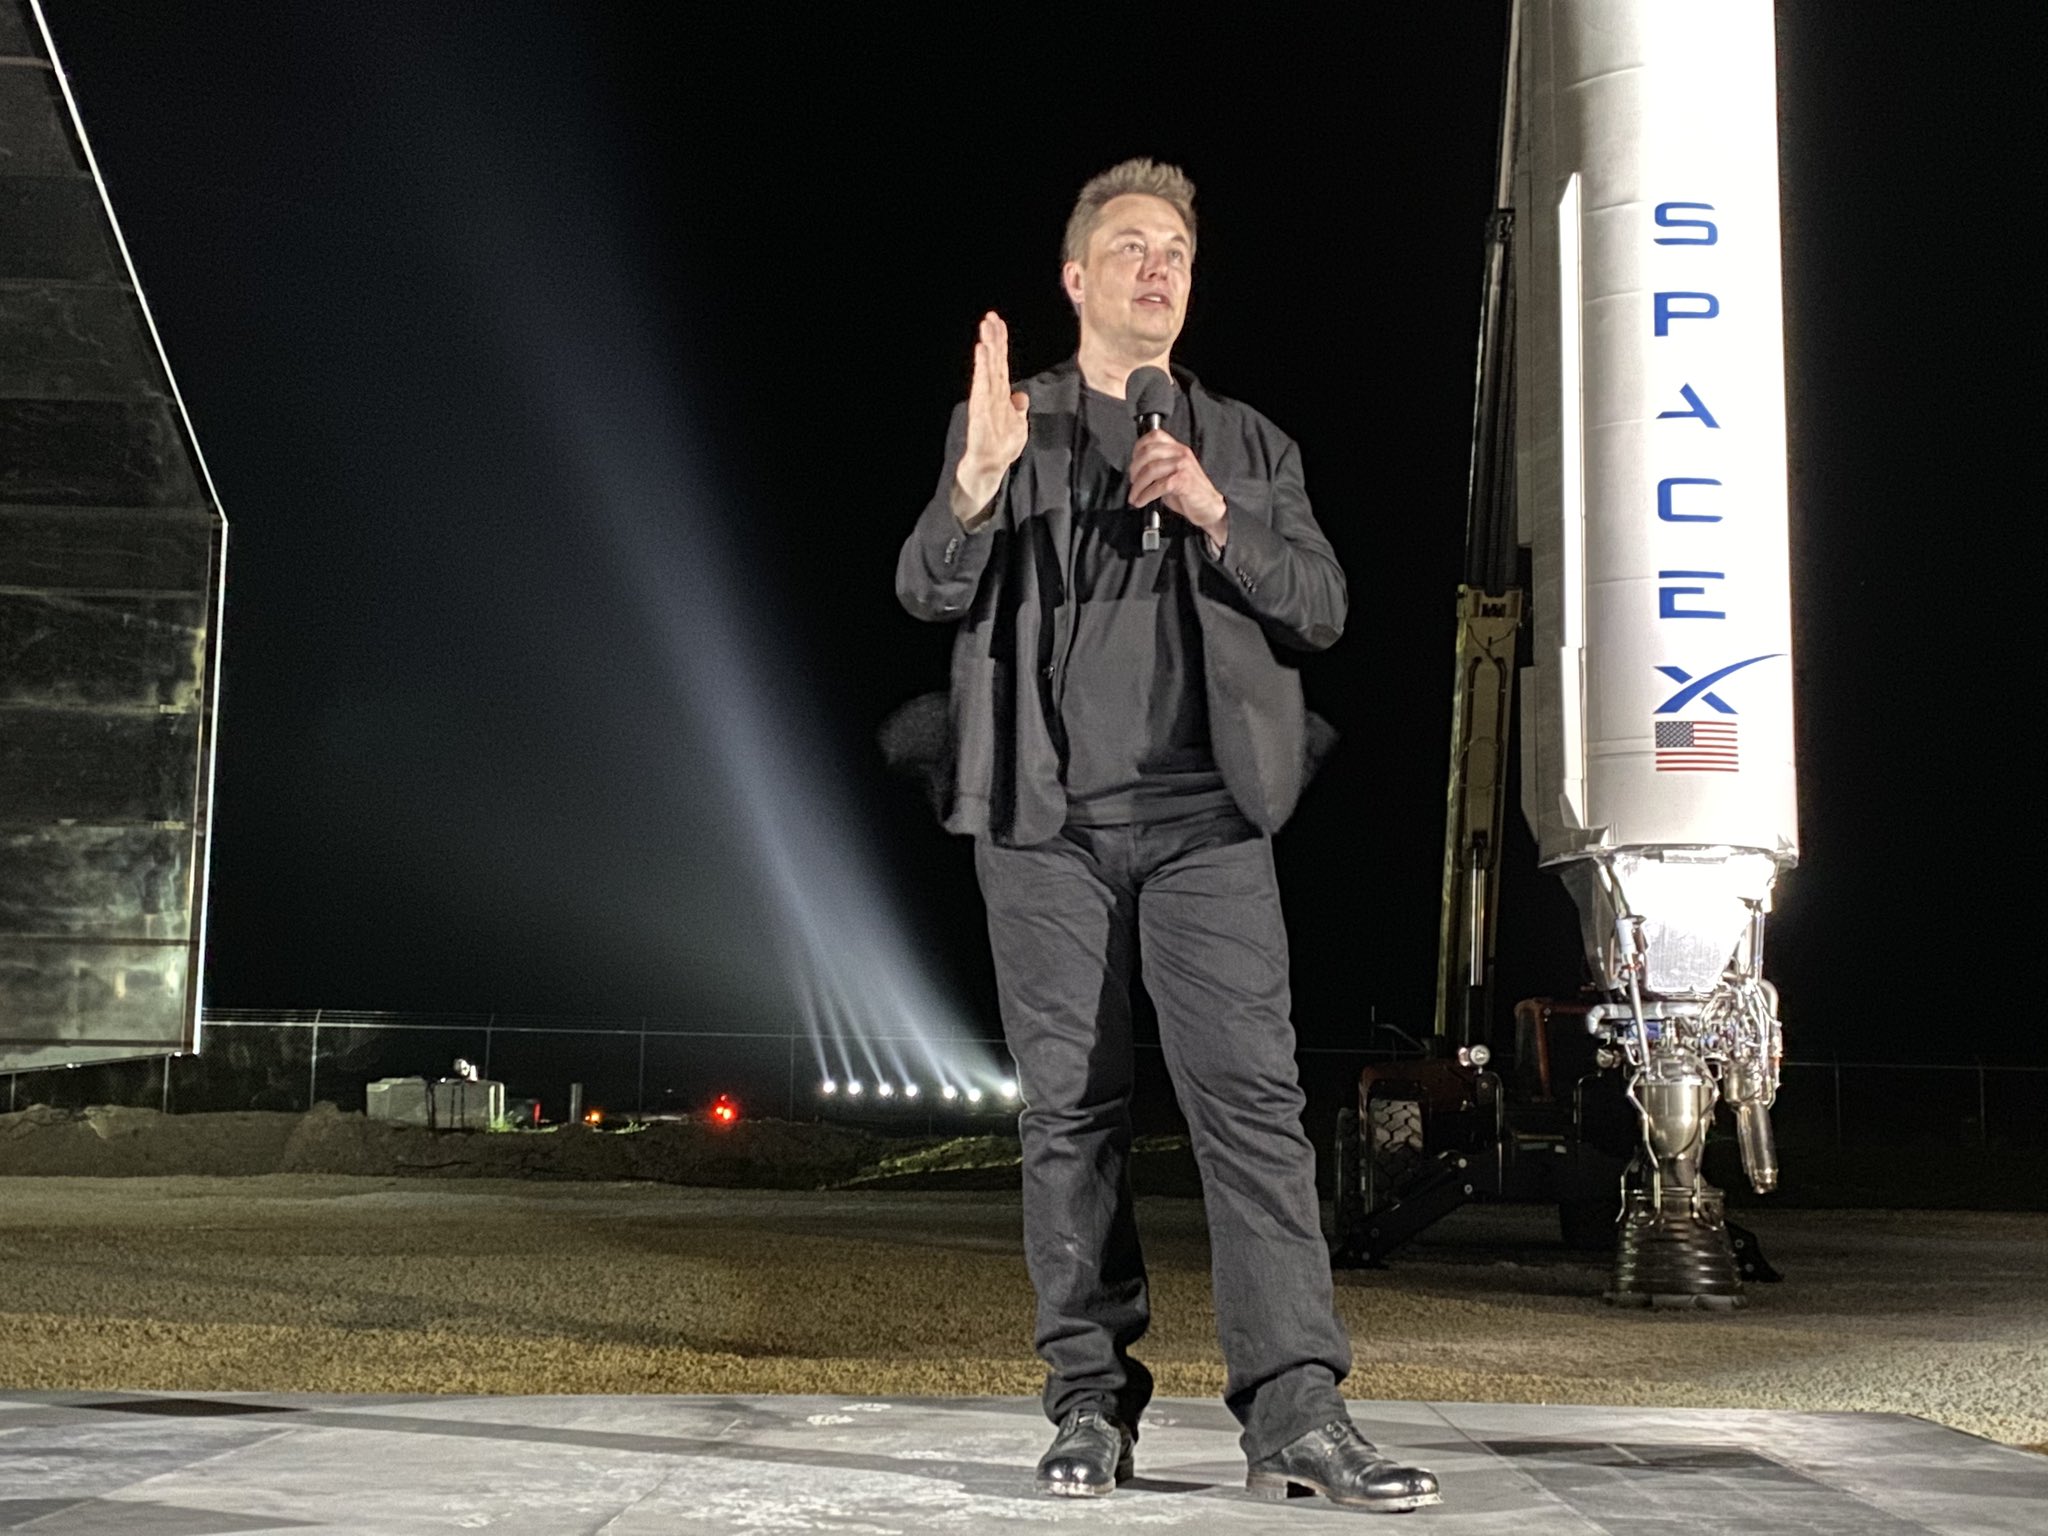 Elon Musk presenting in front of Starship MK 1 and Falcon 1. 